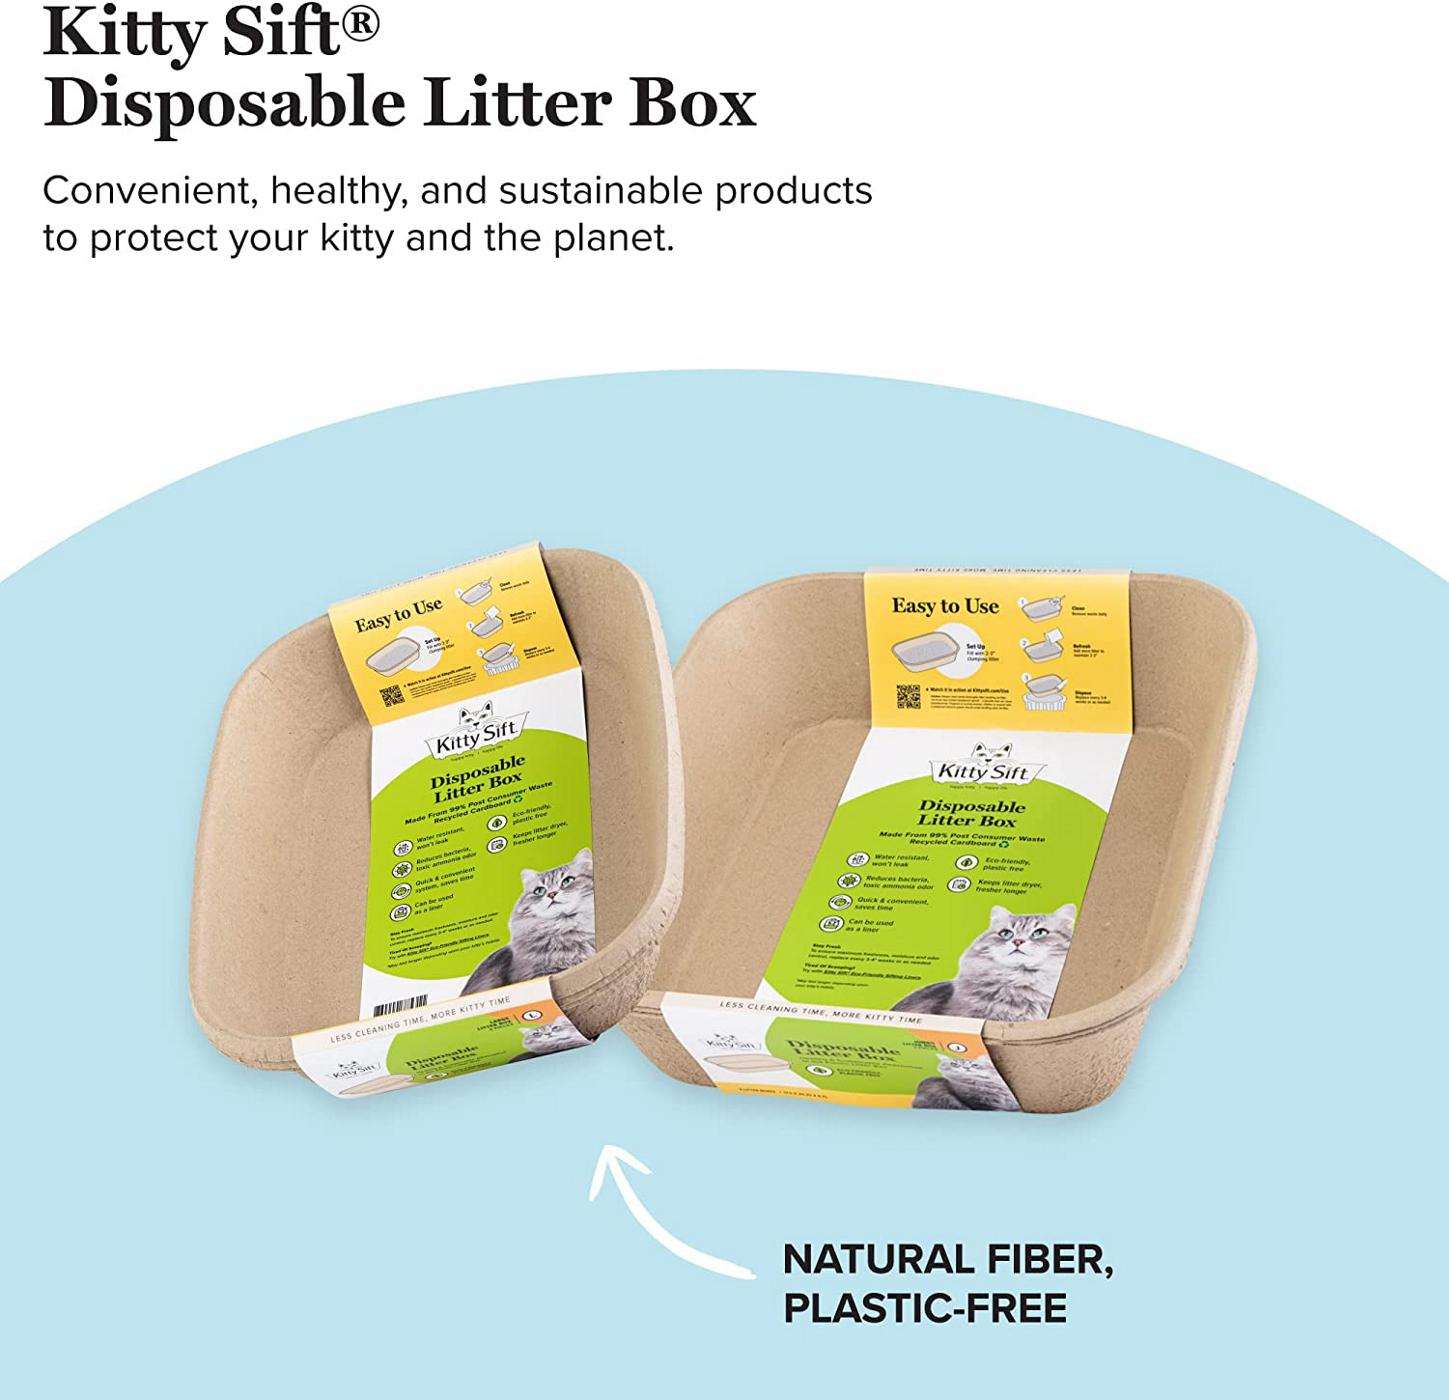 Kitty Sift Disposable Litter Box; image 2 of 4